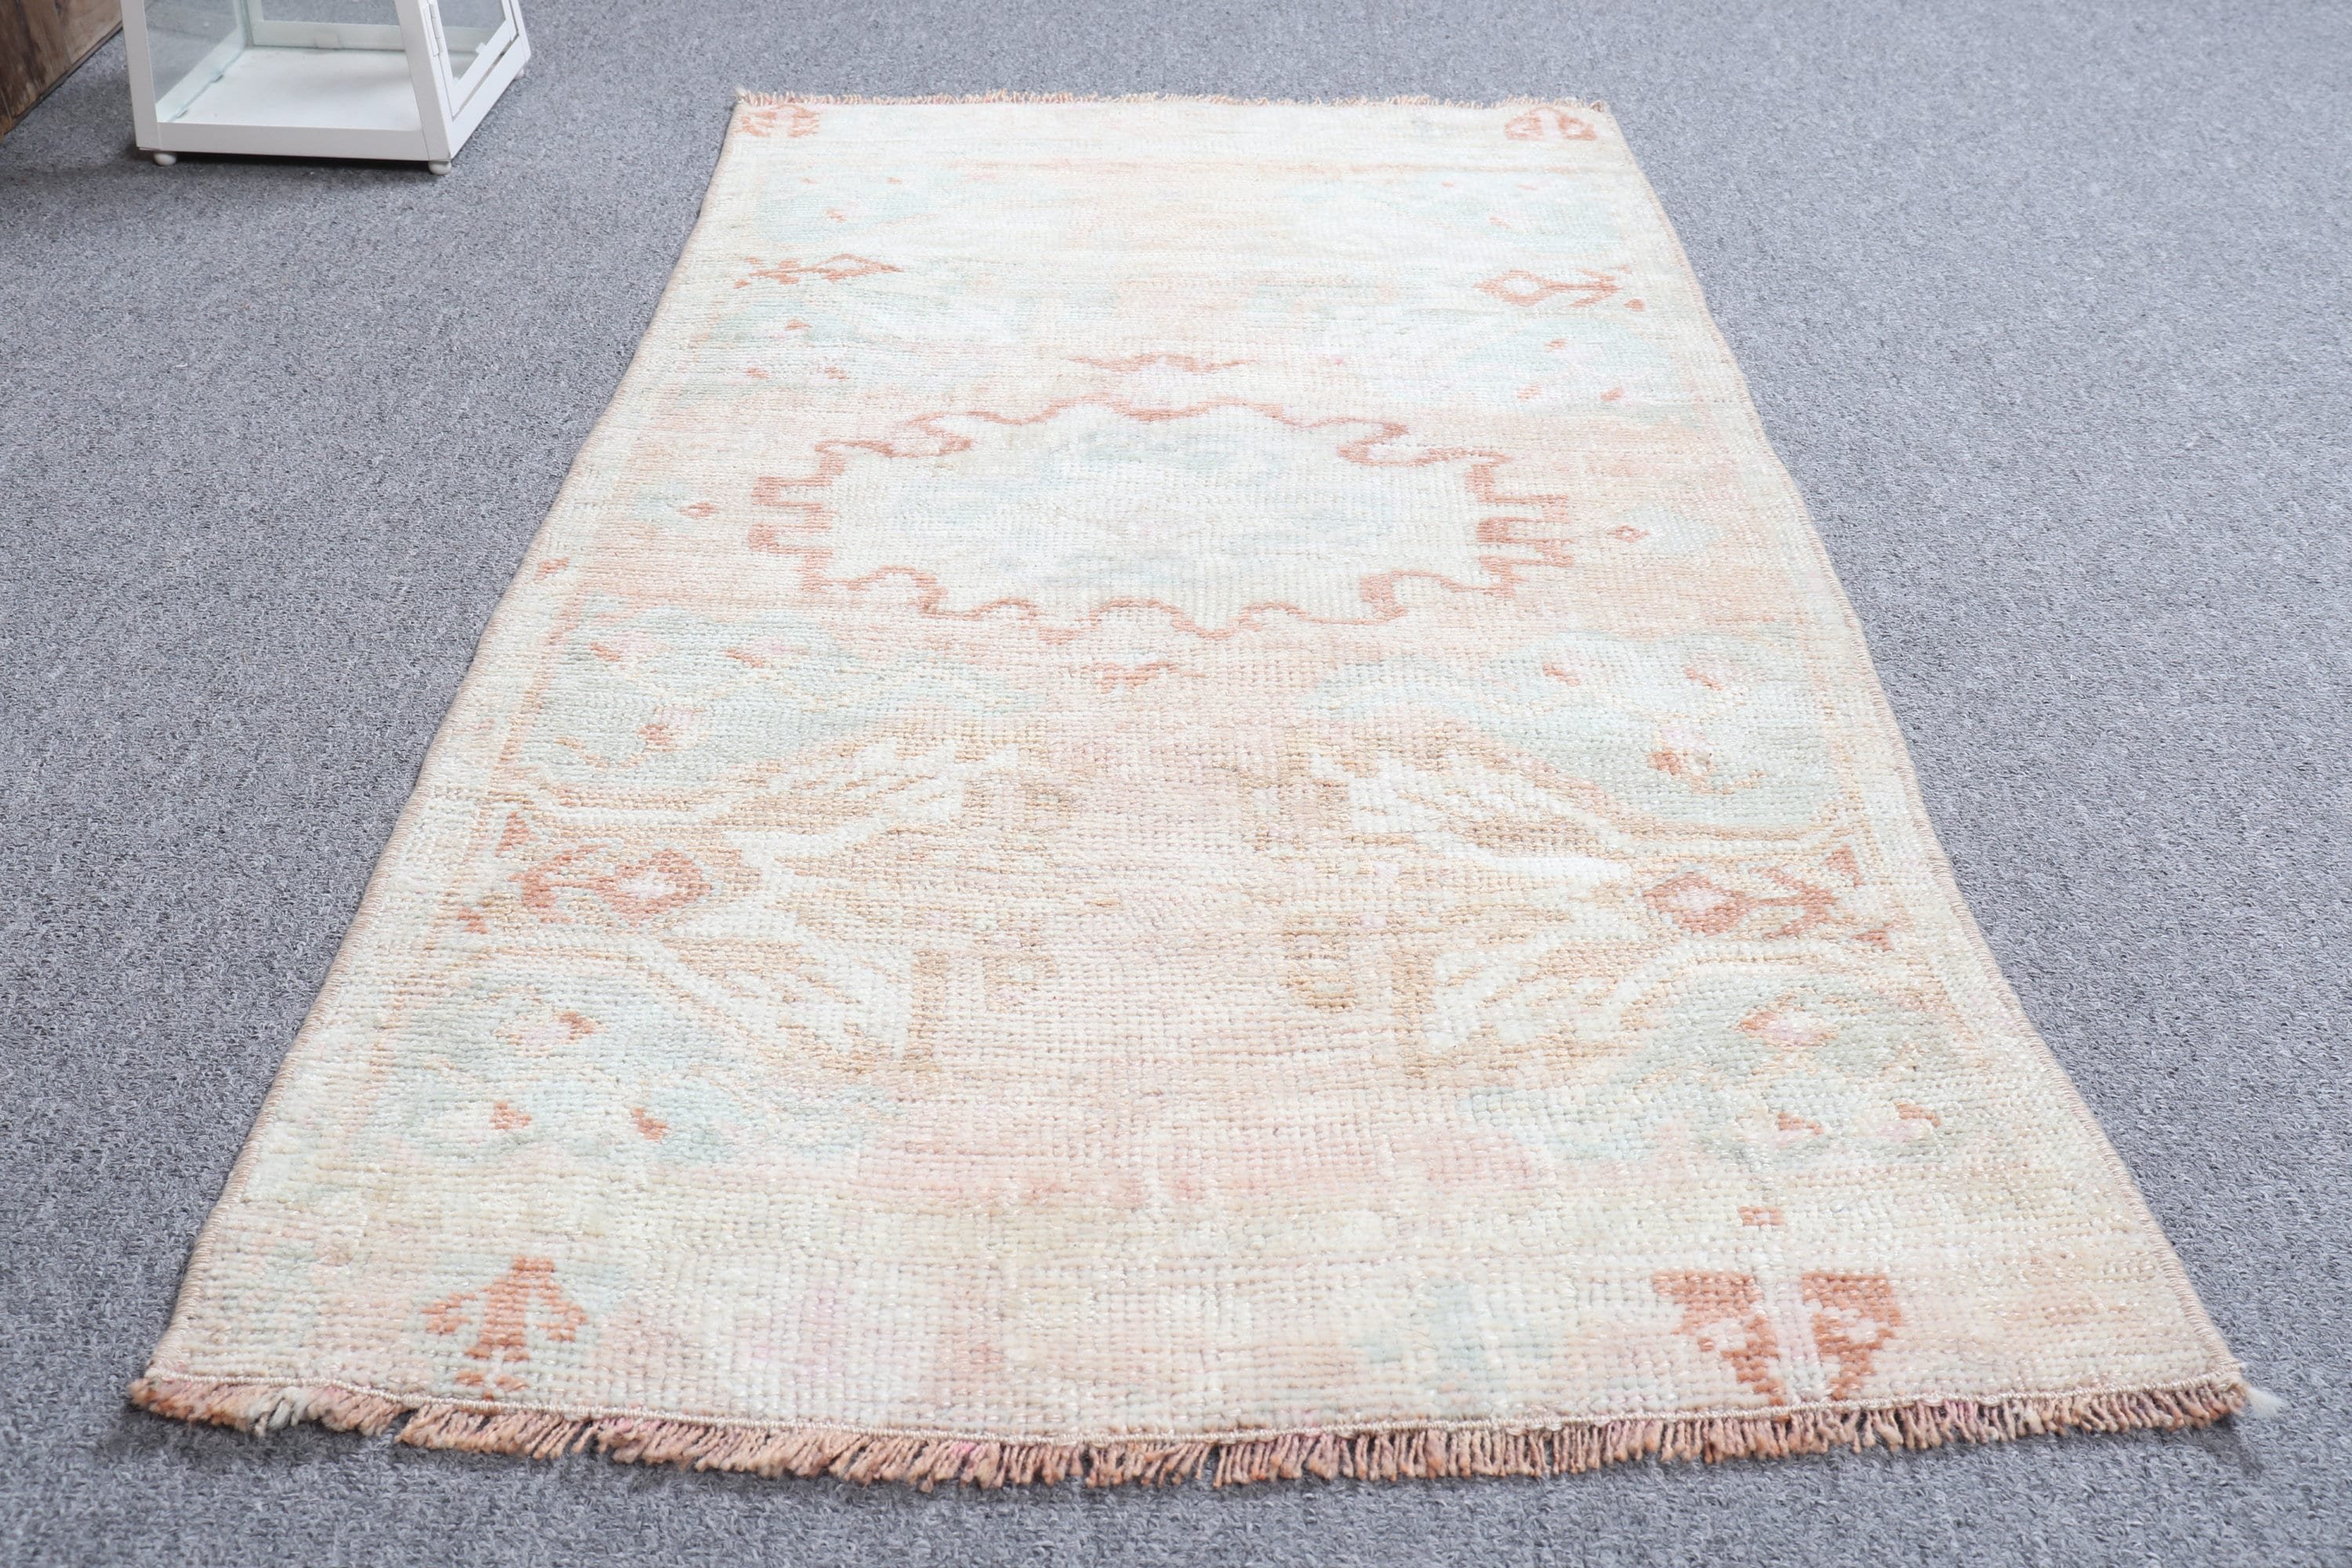 Vintage Rugs, Office Rug, Wall Hanging Rugs, Blue Antique Rug, Turkish Rug, Bath Rug, Antique Rugs, Home Decor Rug, 1.7x3.2 ft Small Rugs